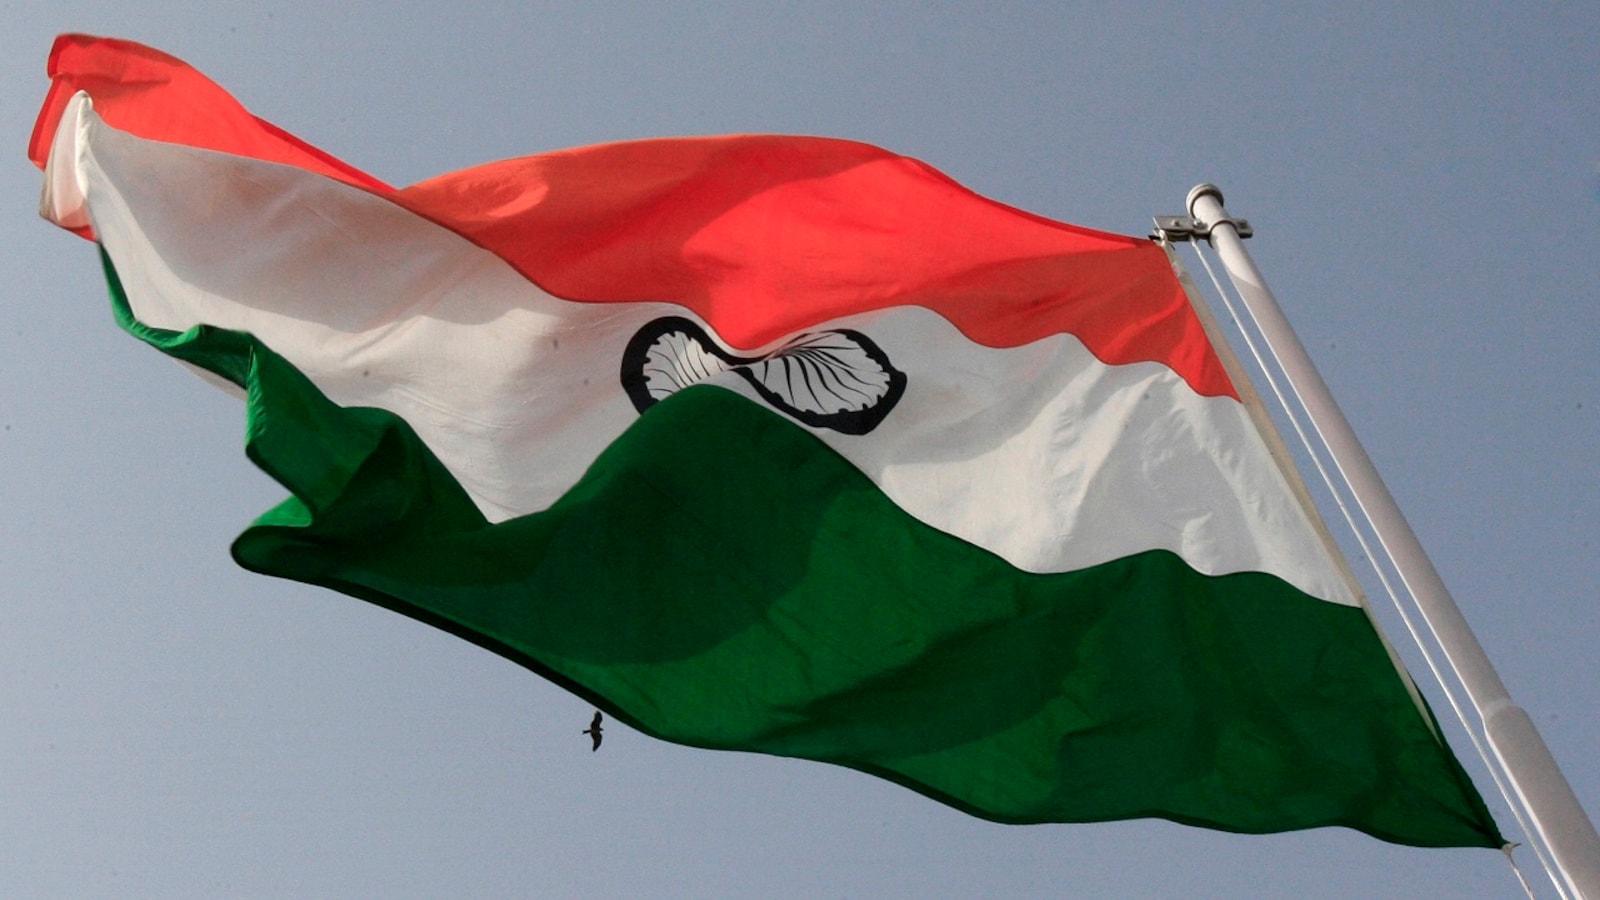 All things saffron, white, and green: Rare facts about India's National Flag